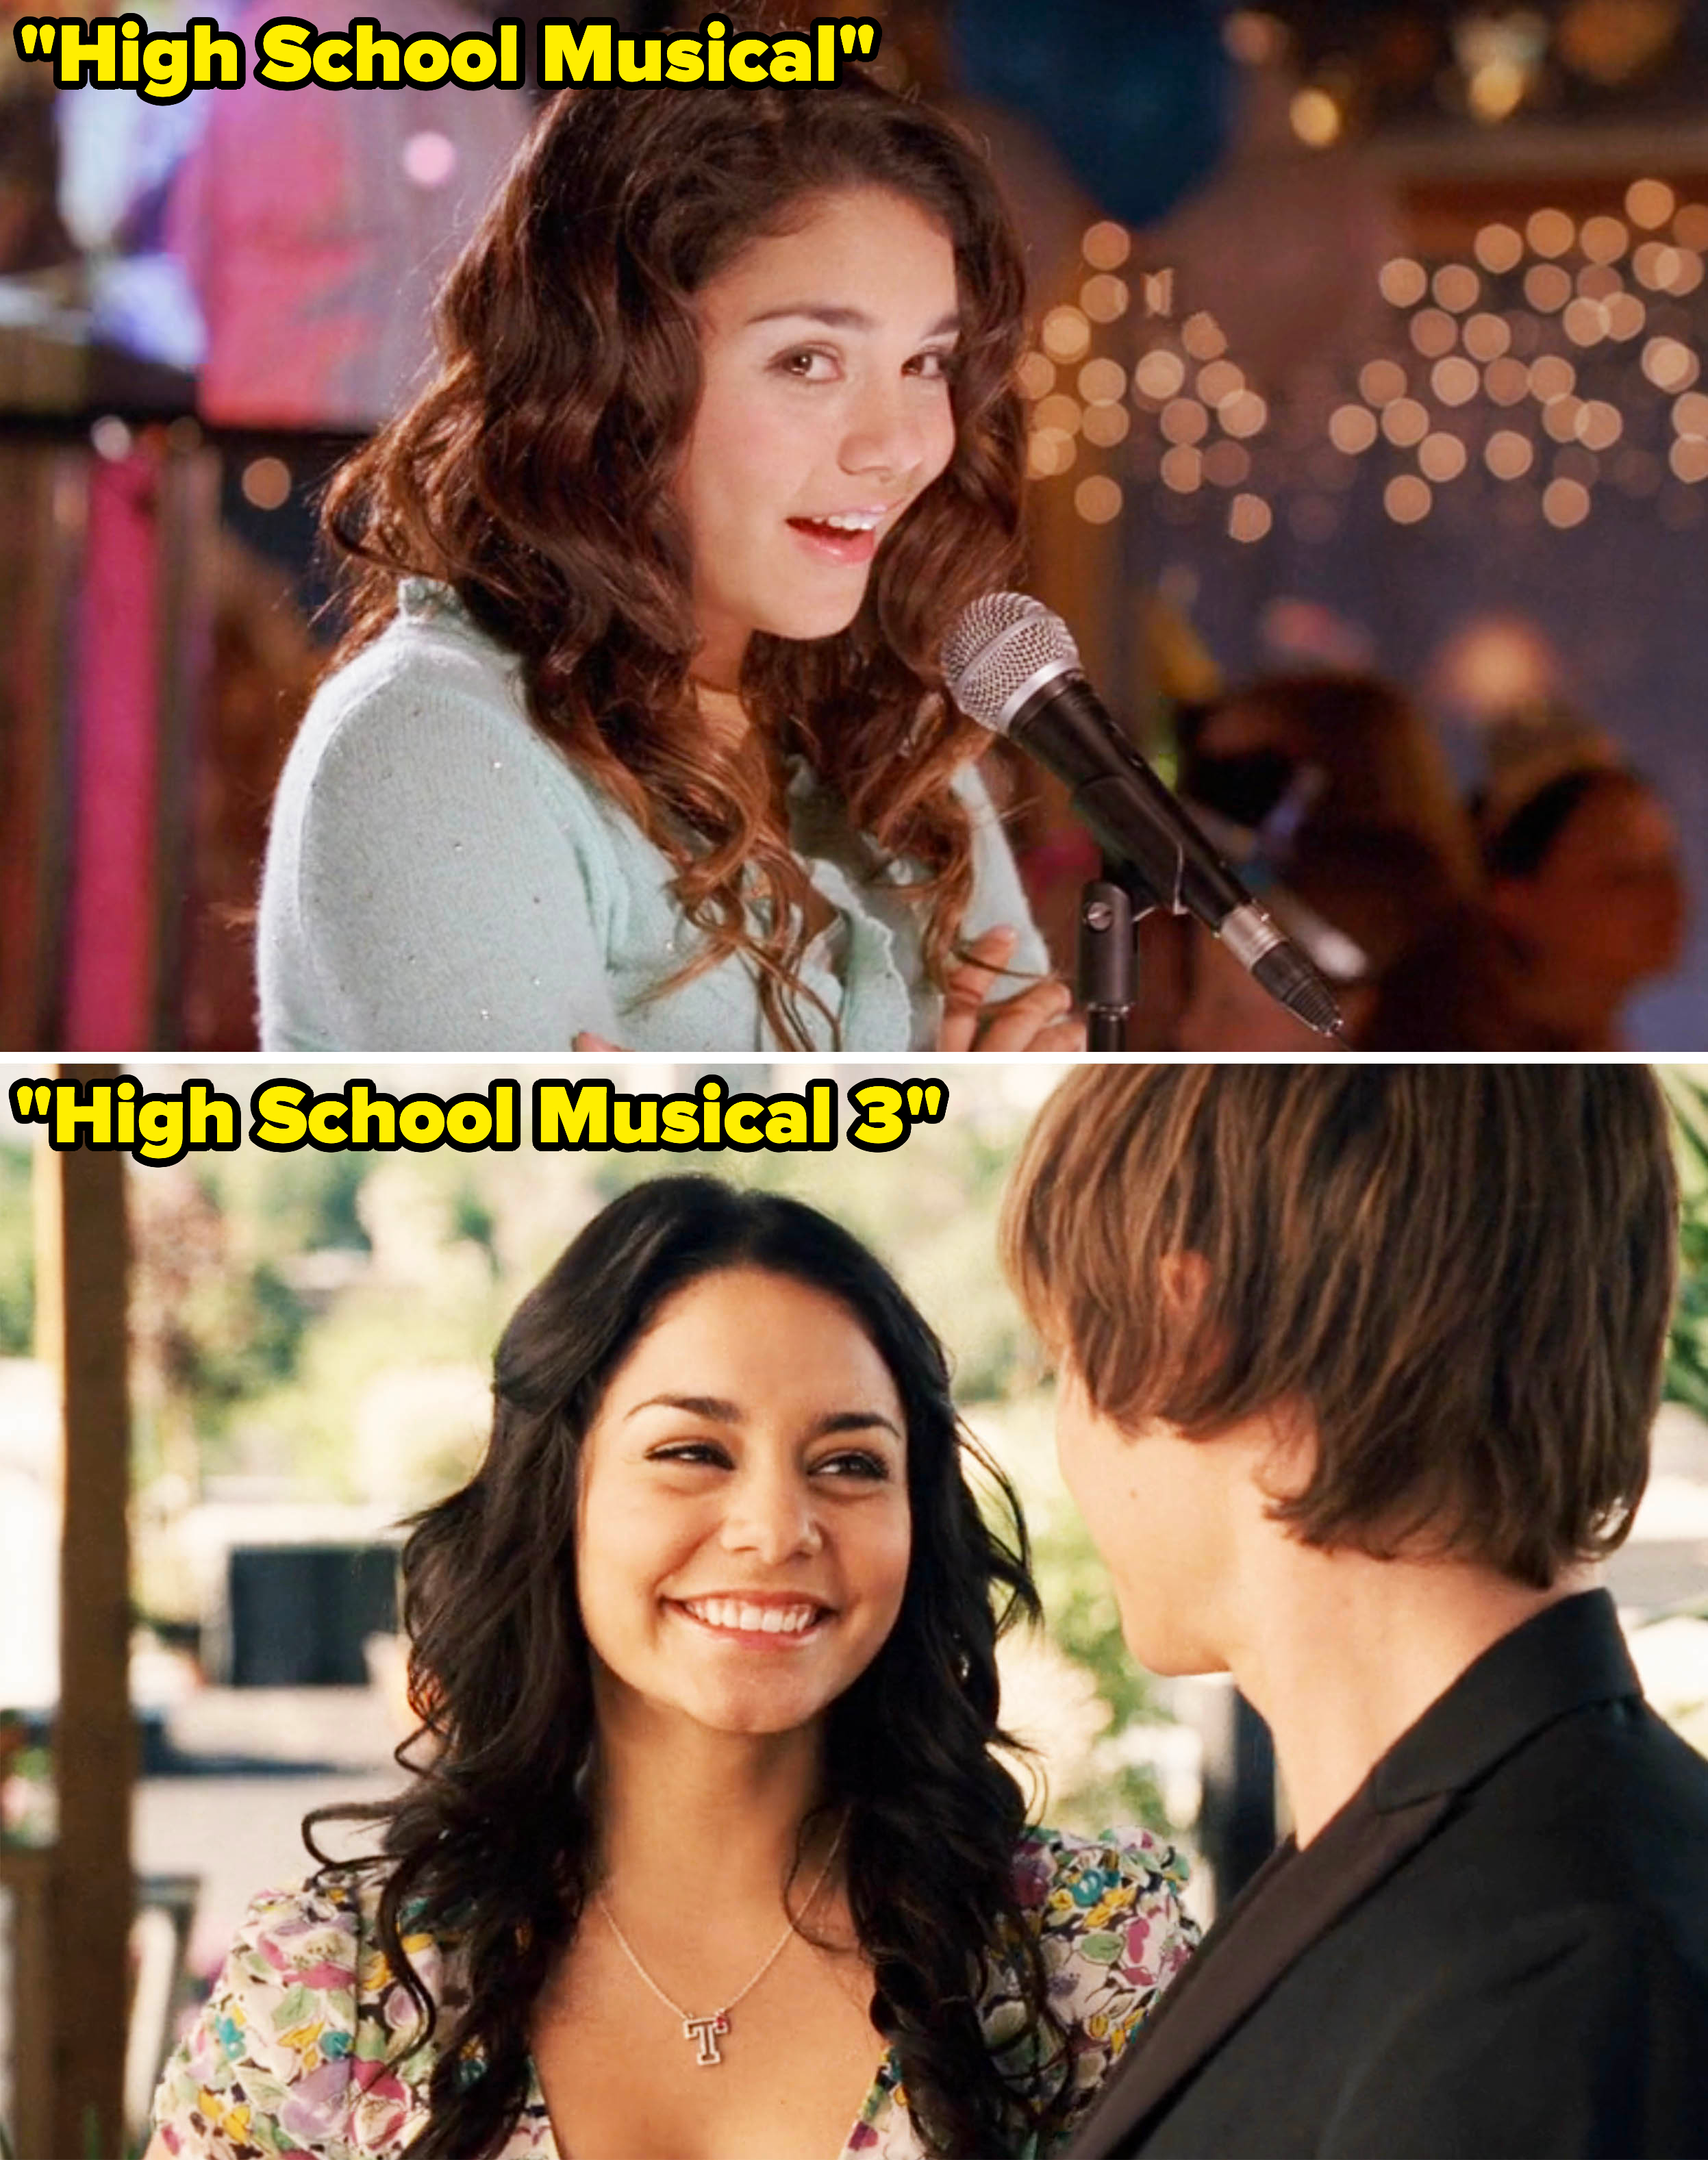 Screenshots from the &quot;High School Musical&quot; movies